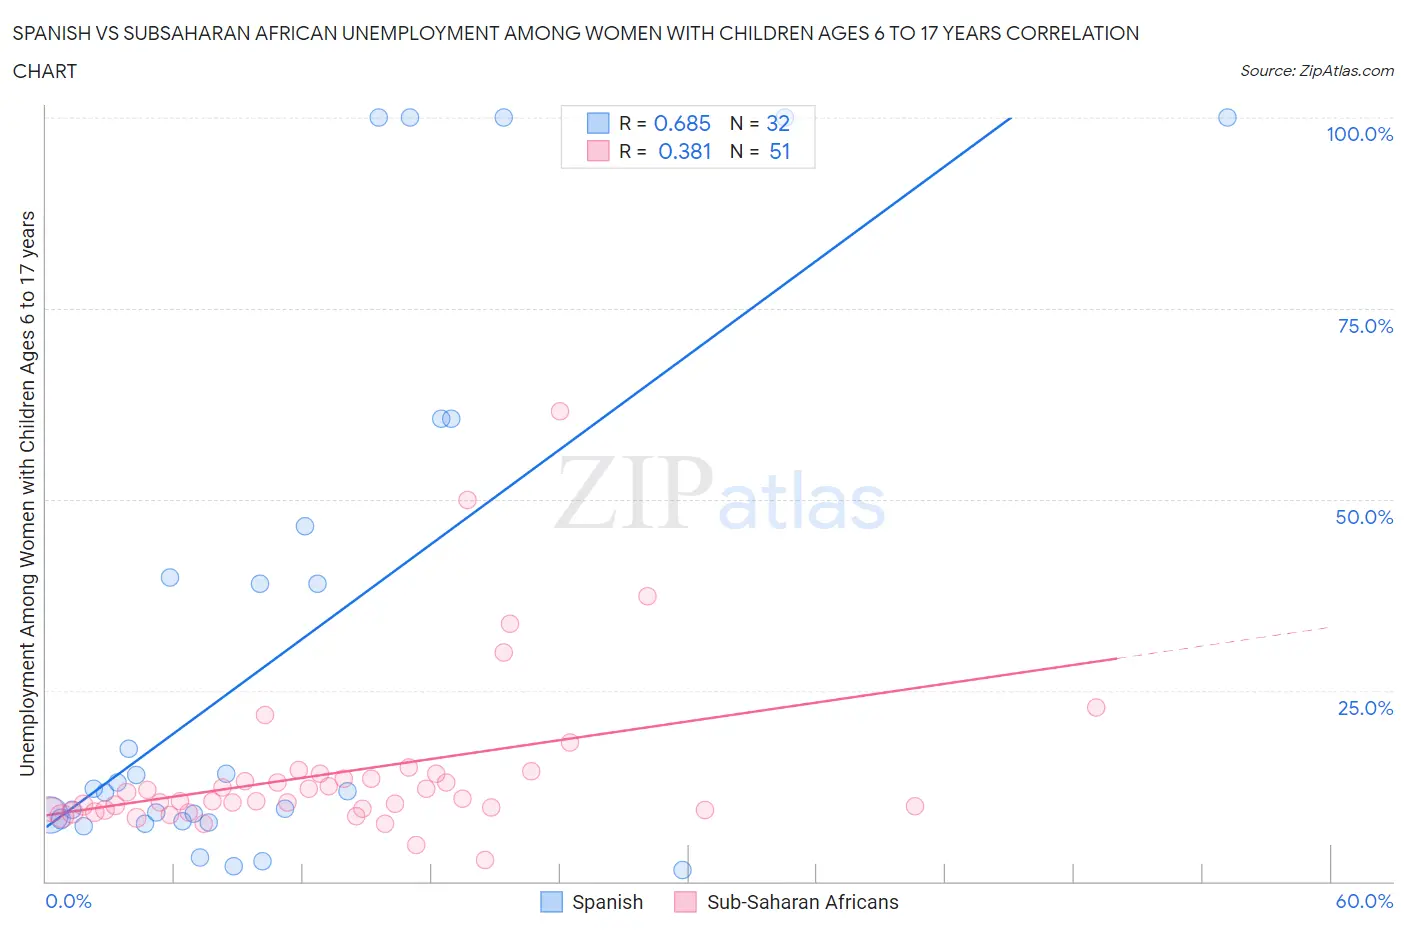 Spanish vs Subsaharan African Unemployment Among Women with Children Ages 6 to 17 years